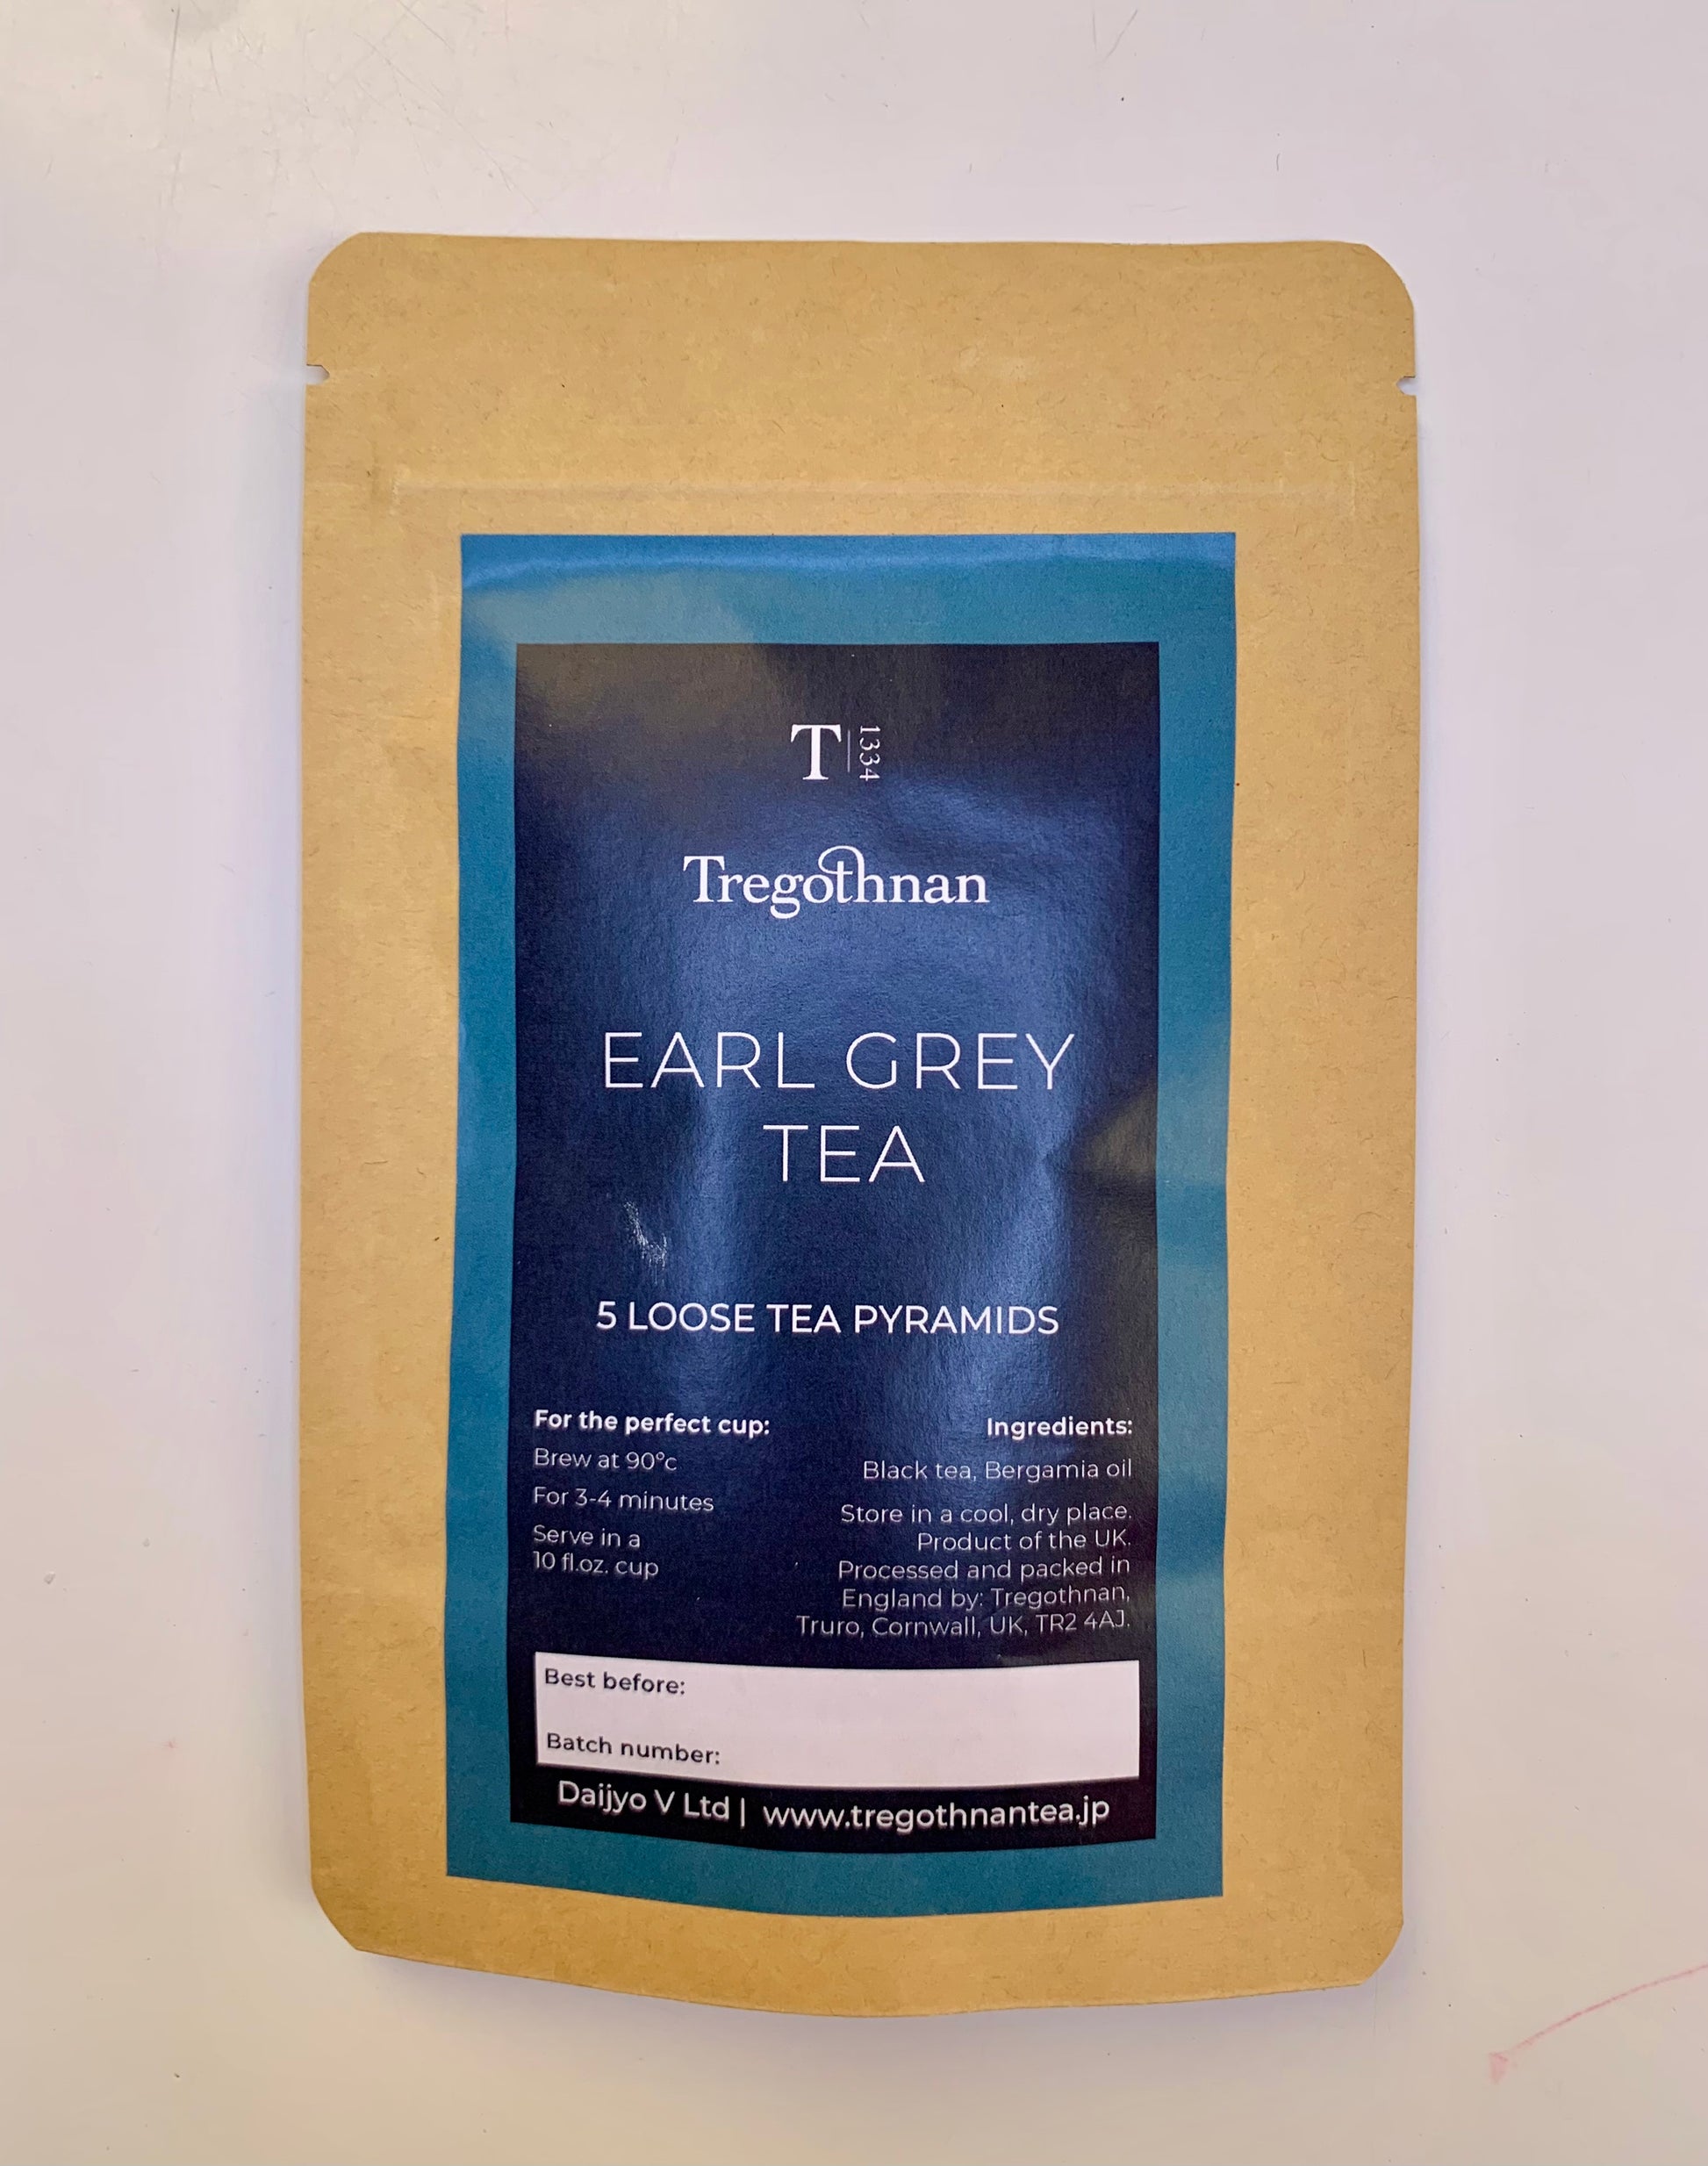 Tregothnan branded pouch with Earl Grey 5 pyramid bags on a clear background